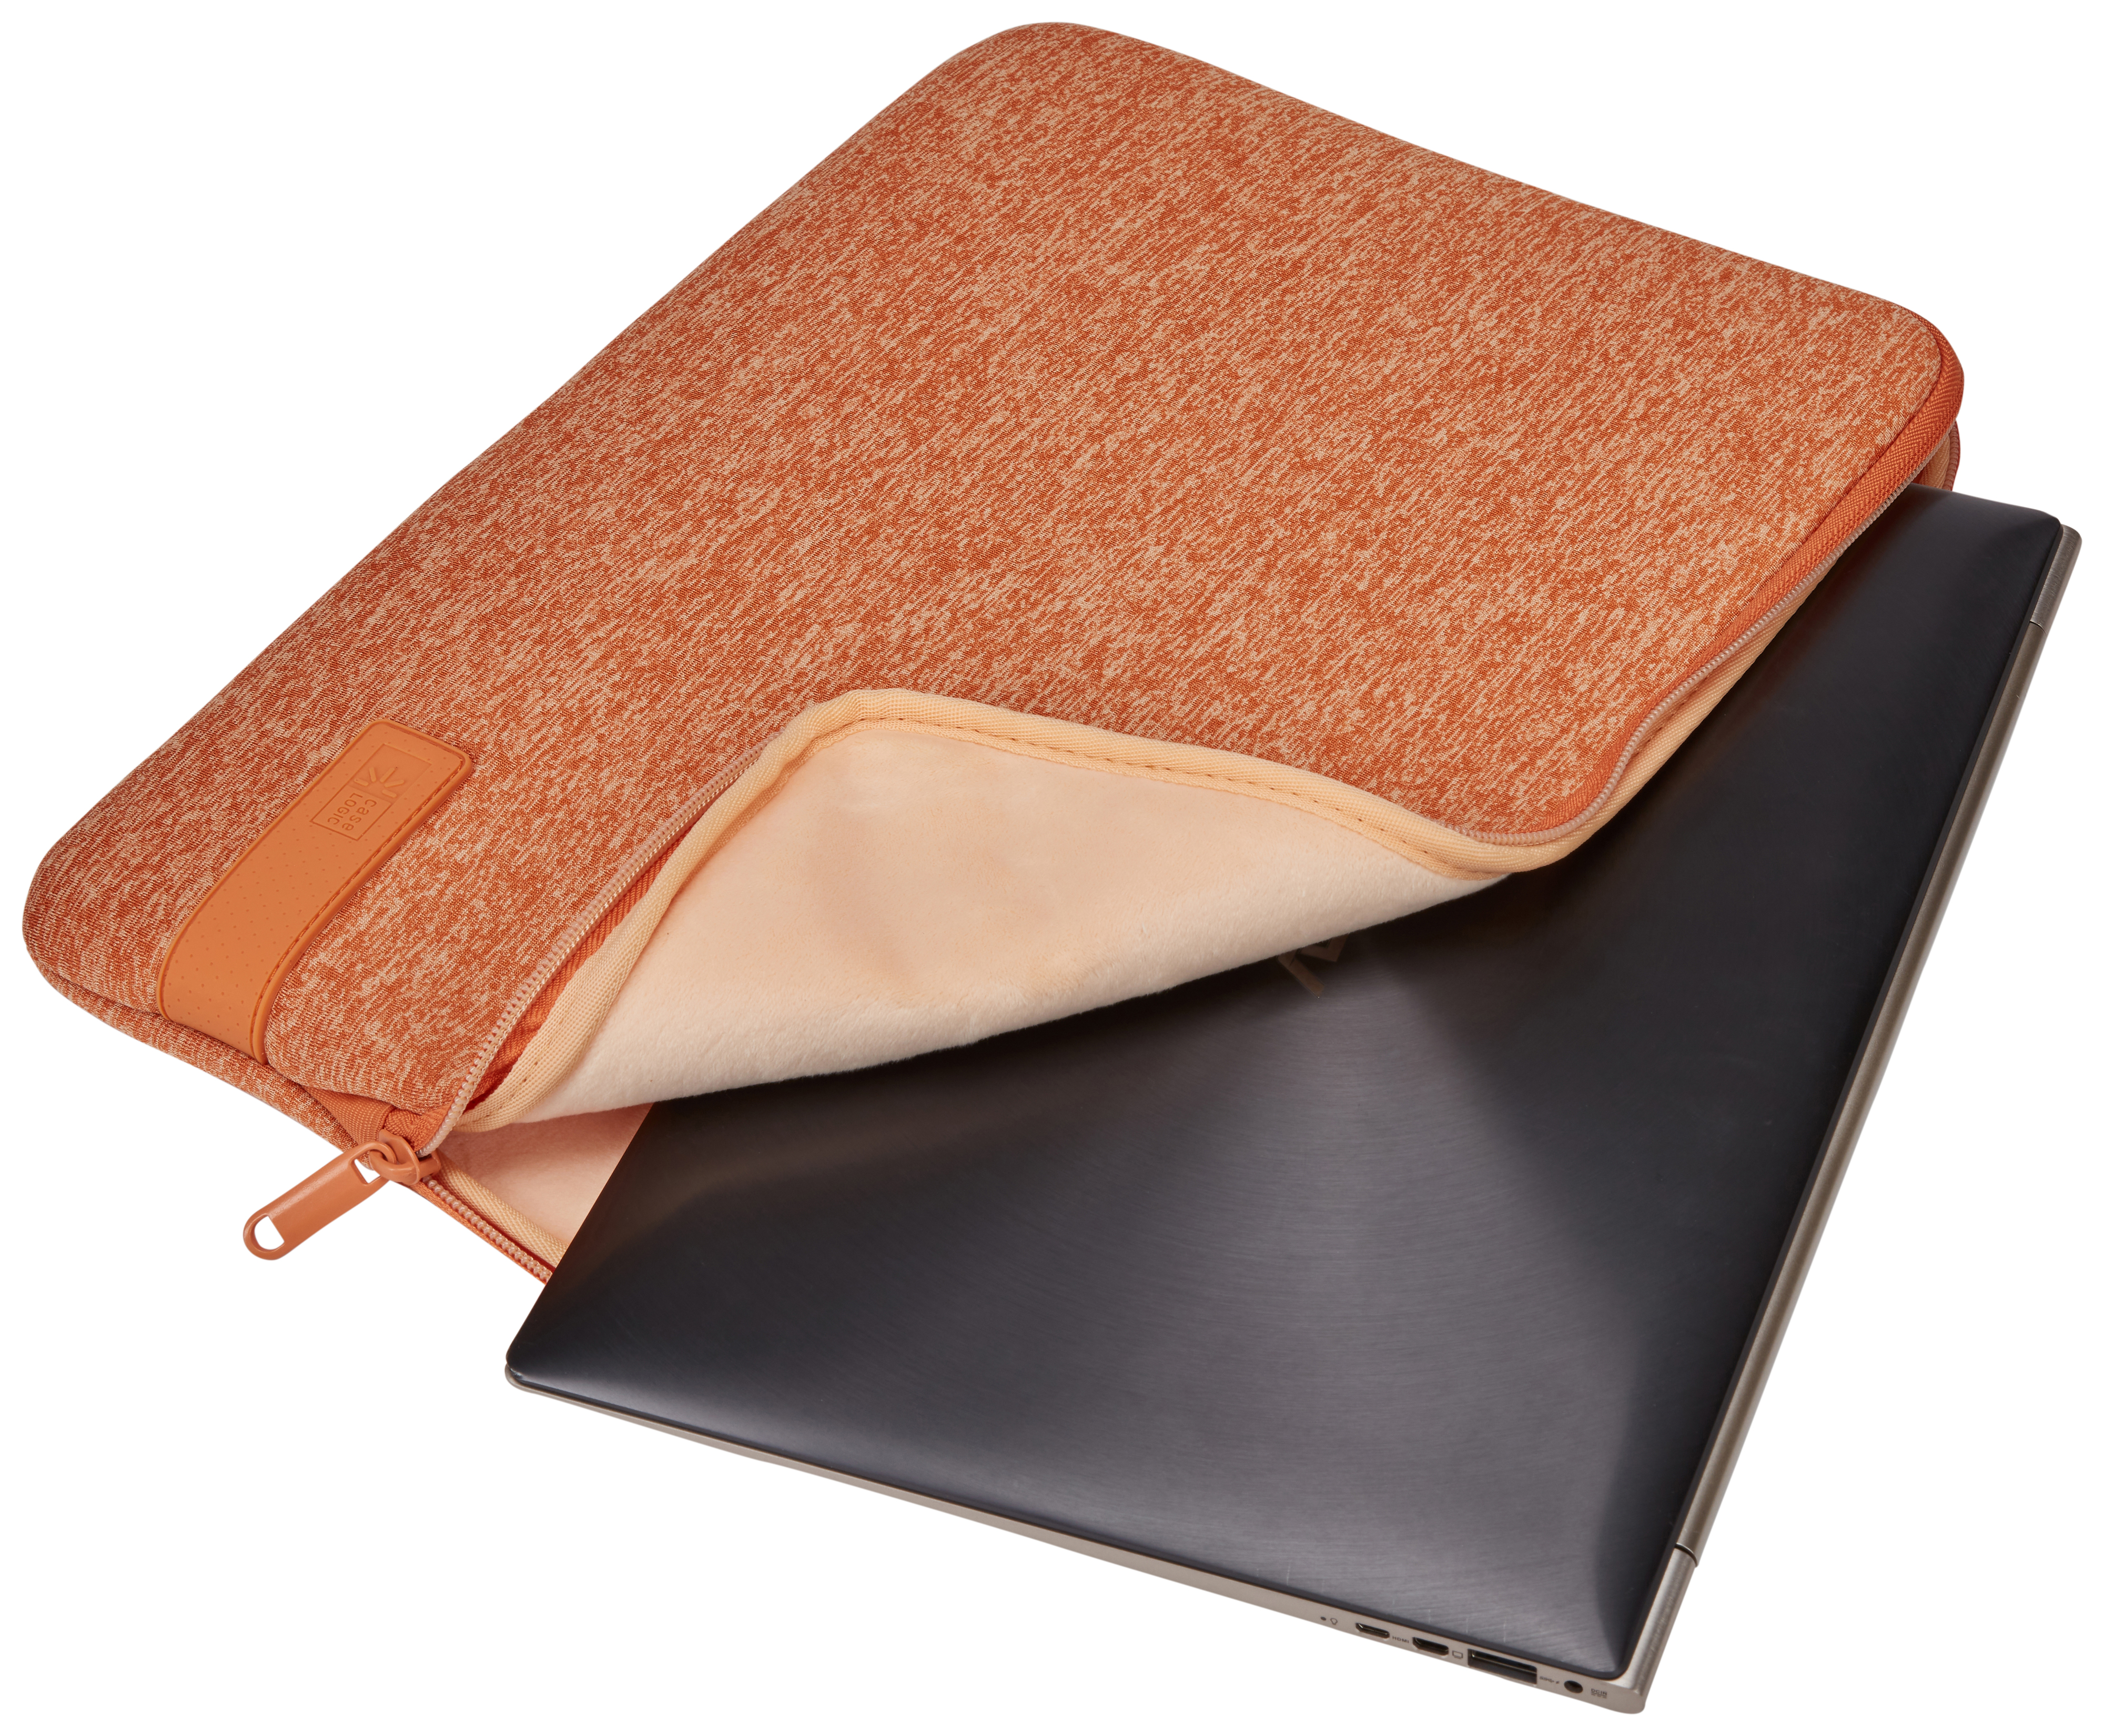 Coral Sleeve CASE Notebook Gold/Apricot Reflect Sleeve Polyester, LOGIC Universal für